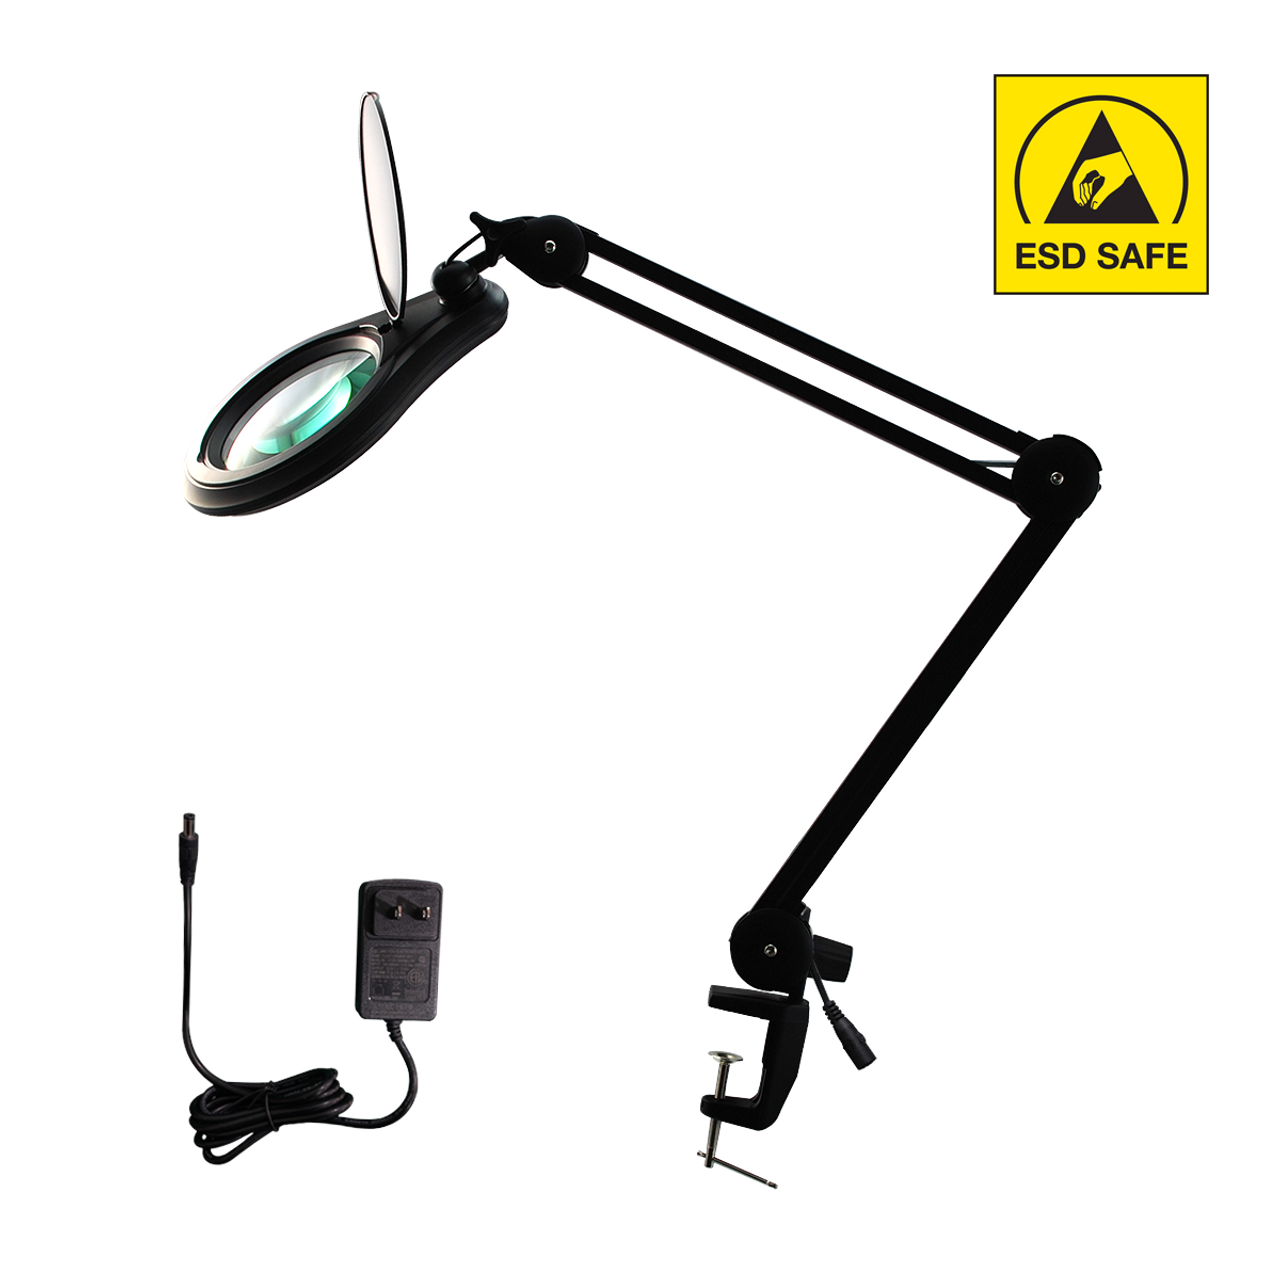 ESD SMD LED Magnifying Lamp with Clamp, 8 Diopter, 5 in. Lens + Flip Cover